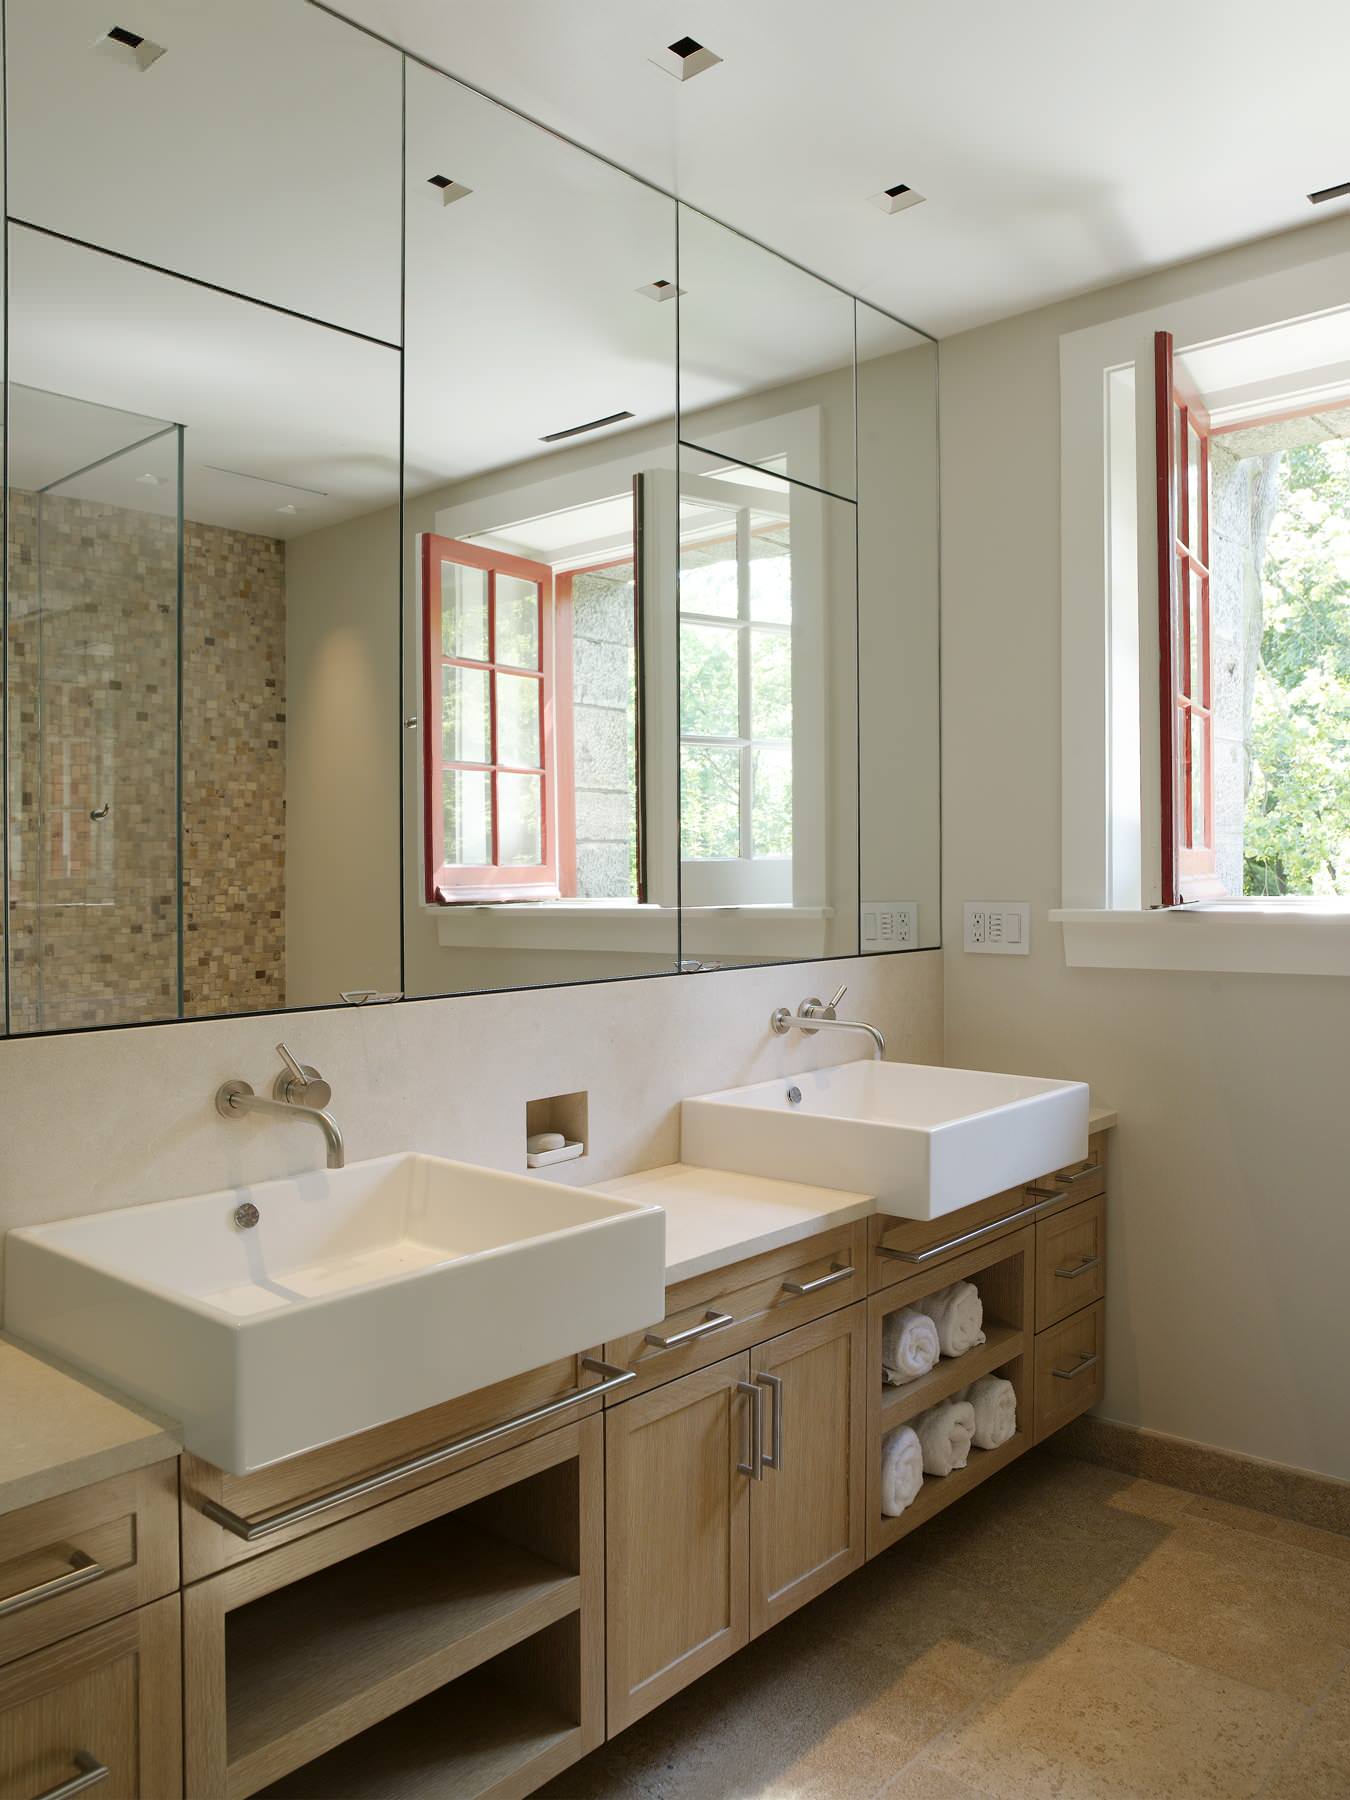 Vanity Electrical Outlet Houzz